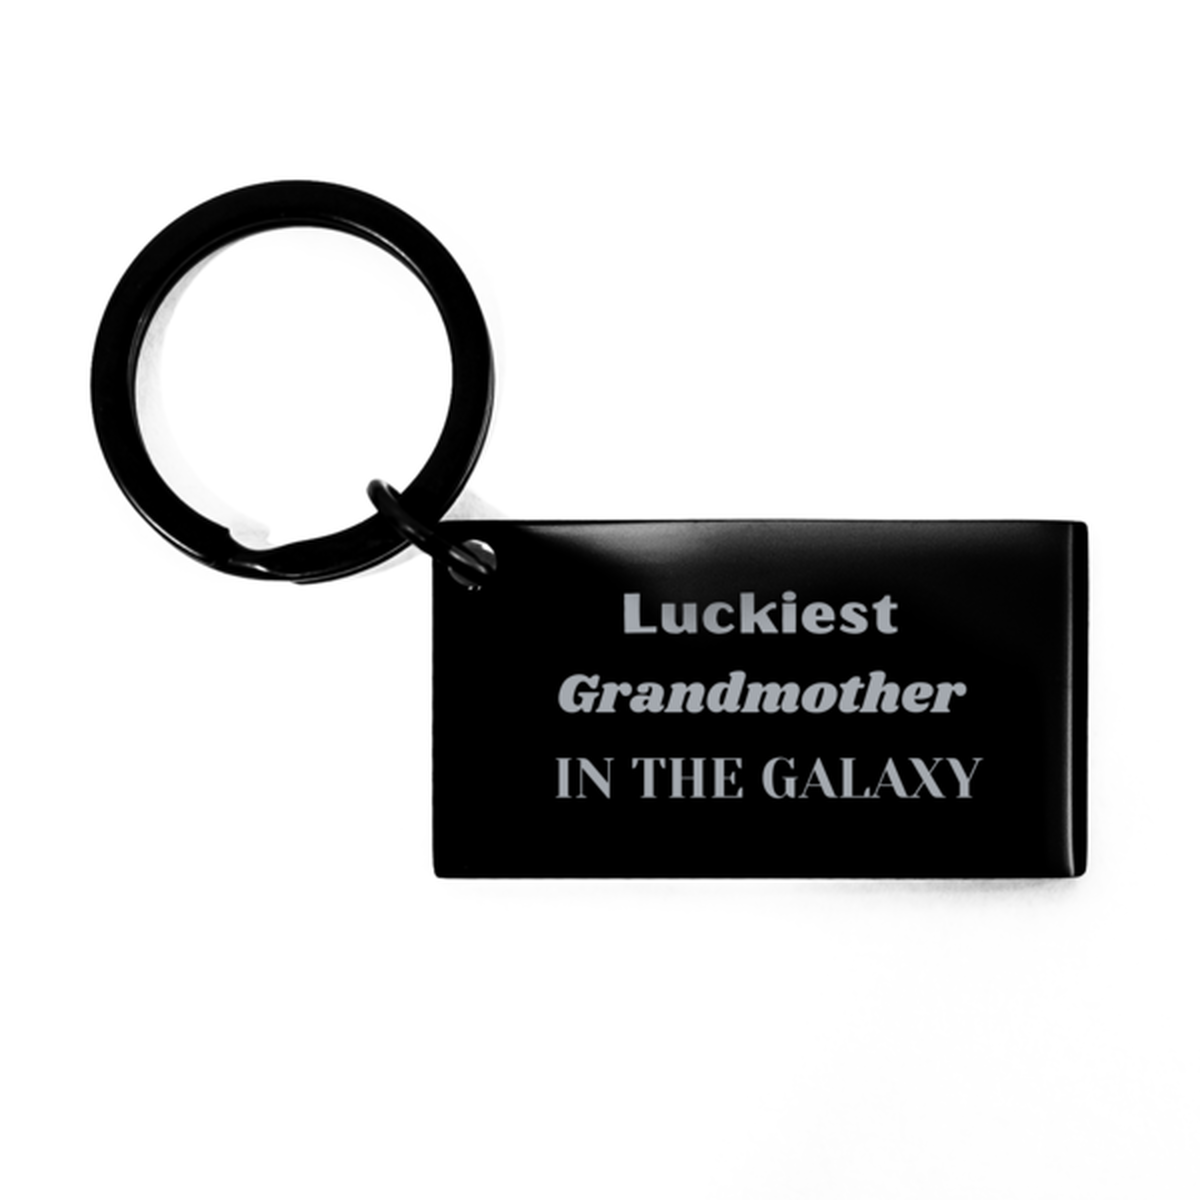 Luckiest Grandmother in the Galaxy, To My Grandmother Engraved Gifts, Christmas Grandmother Keychain Gifts, X-mas Birthday Unique Gifts For Grandmother Men Women